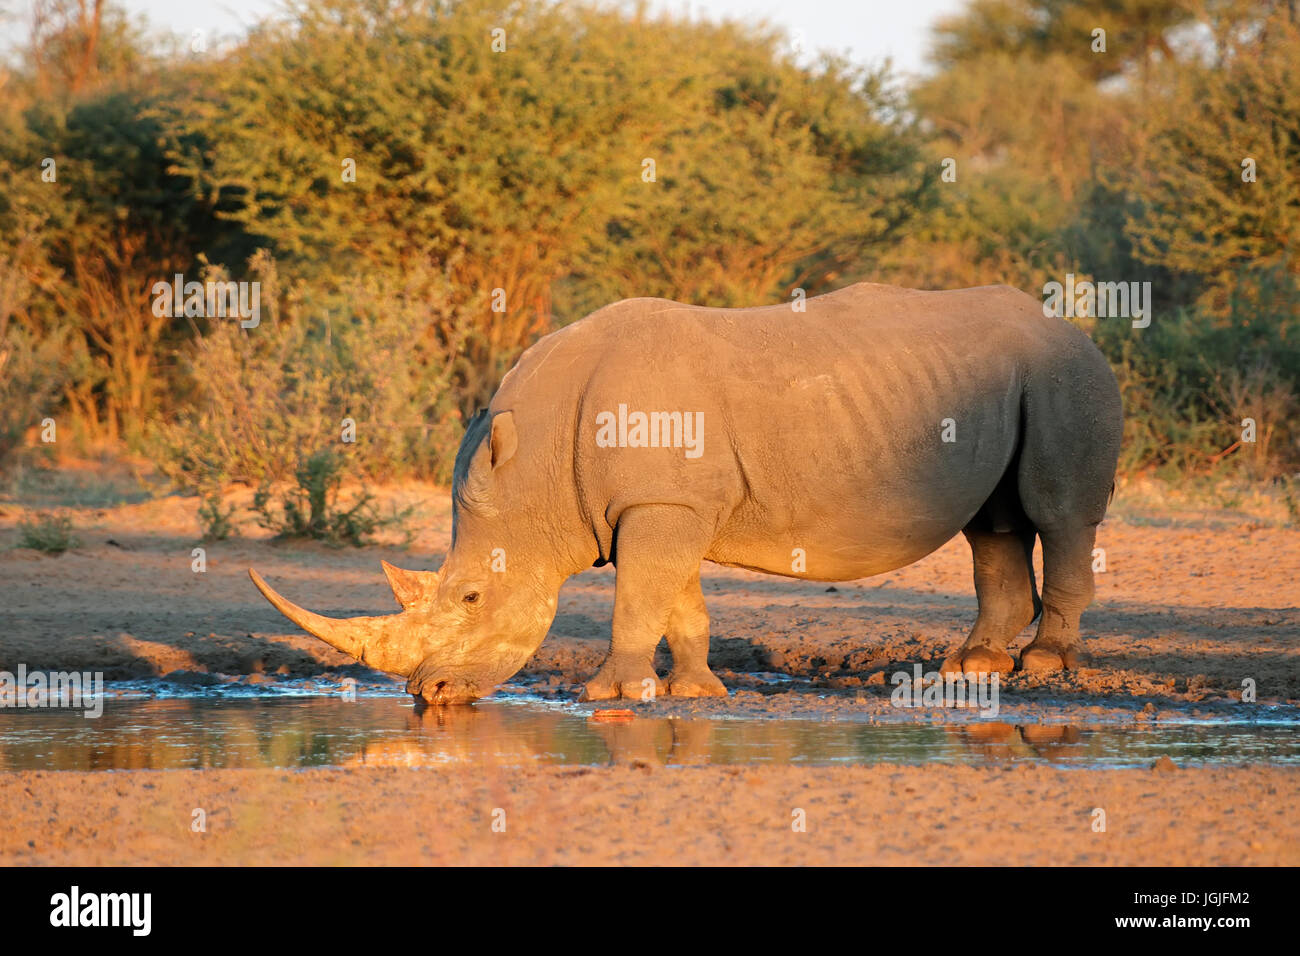 White rhinoceros (Ceratotherium simum) drinking water in late afternoon light, South Africa Stock Photo